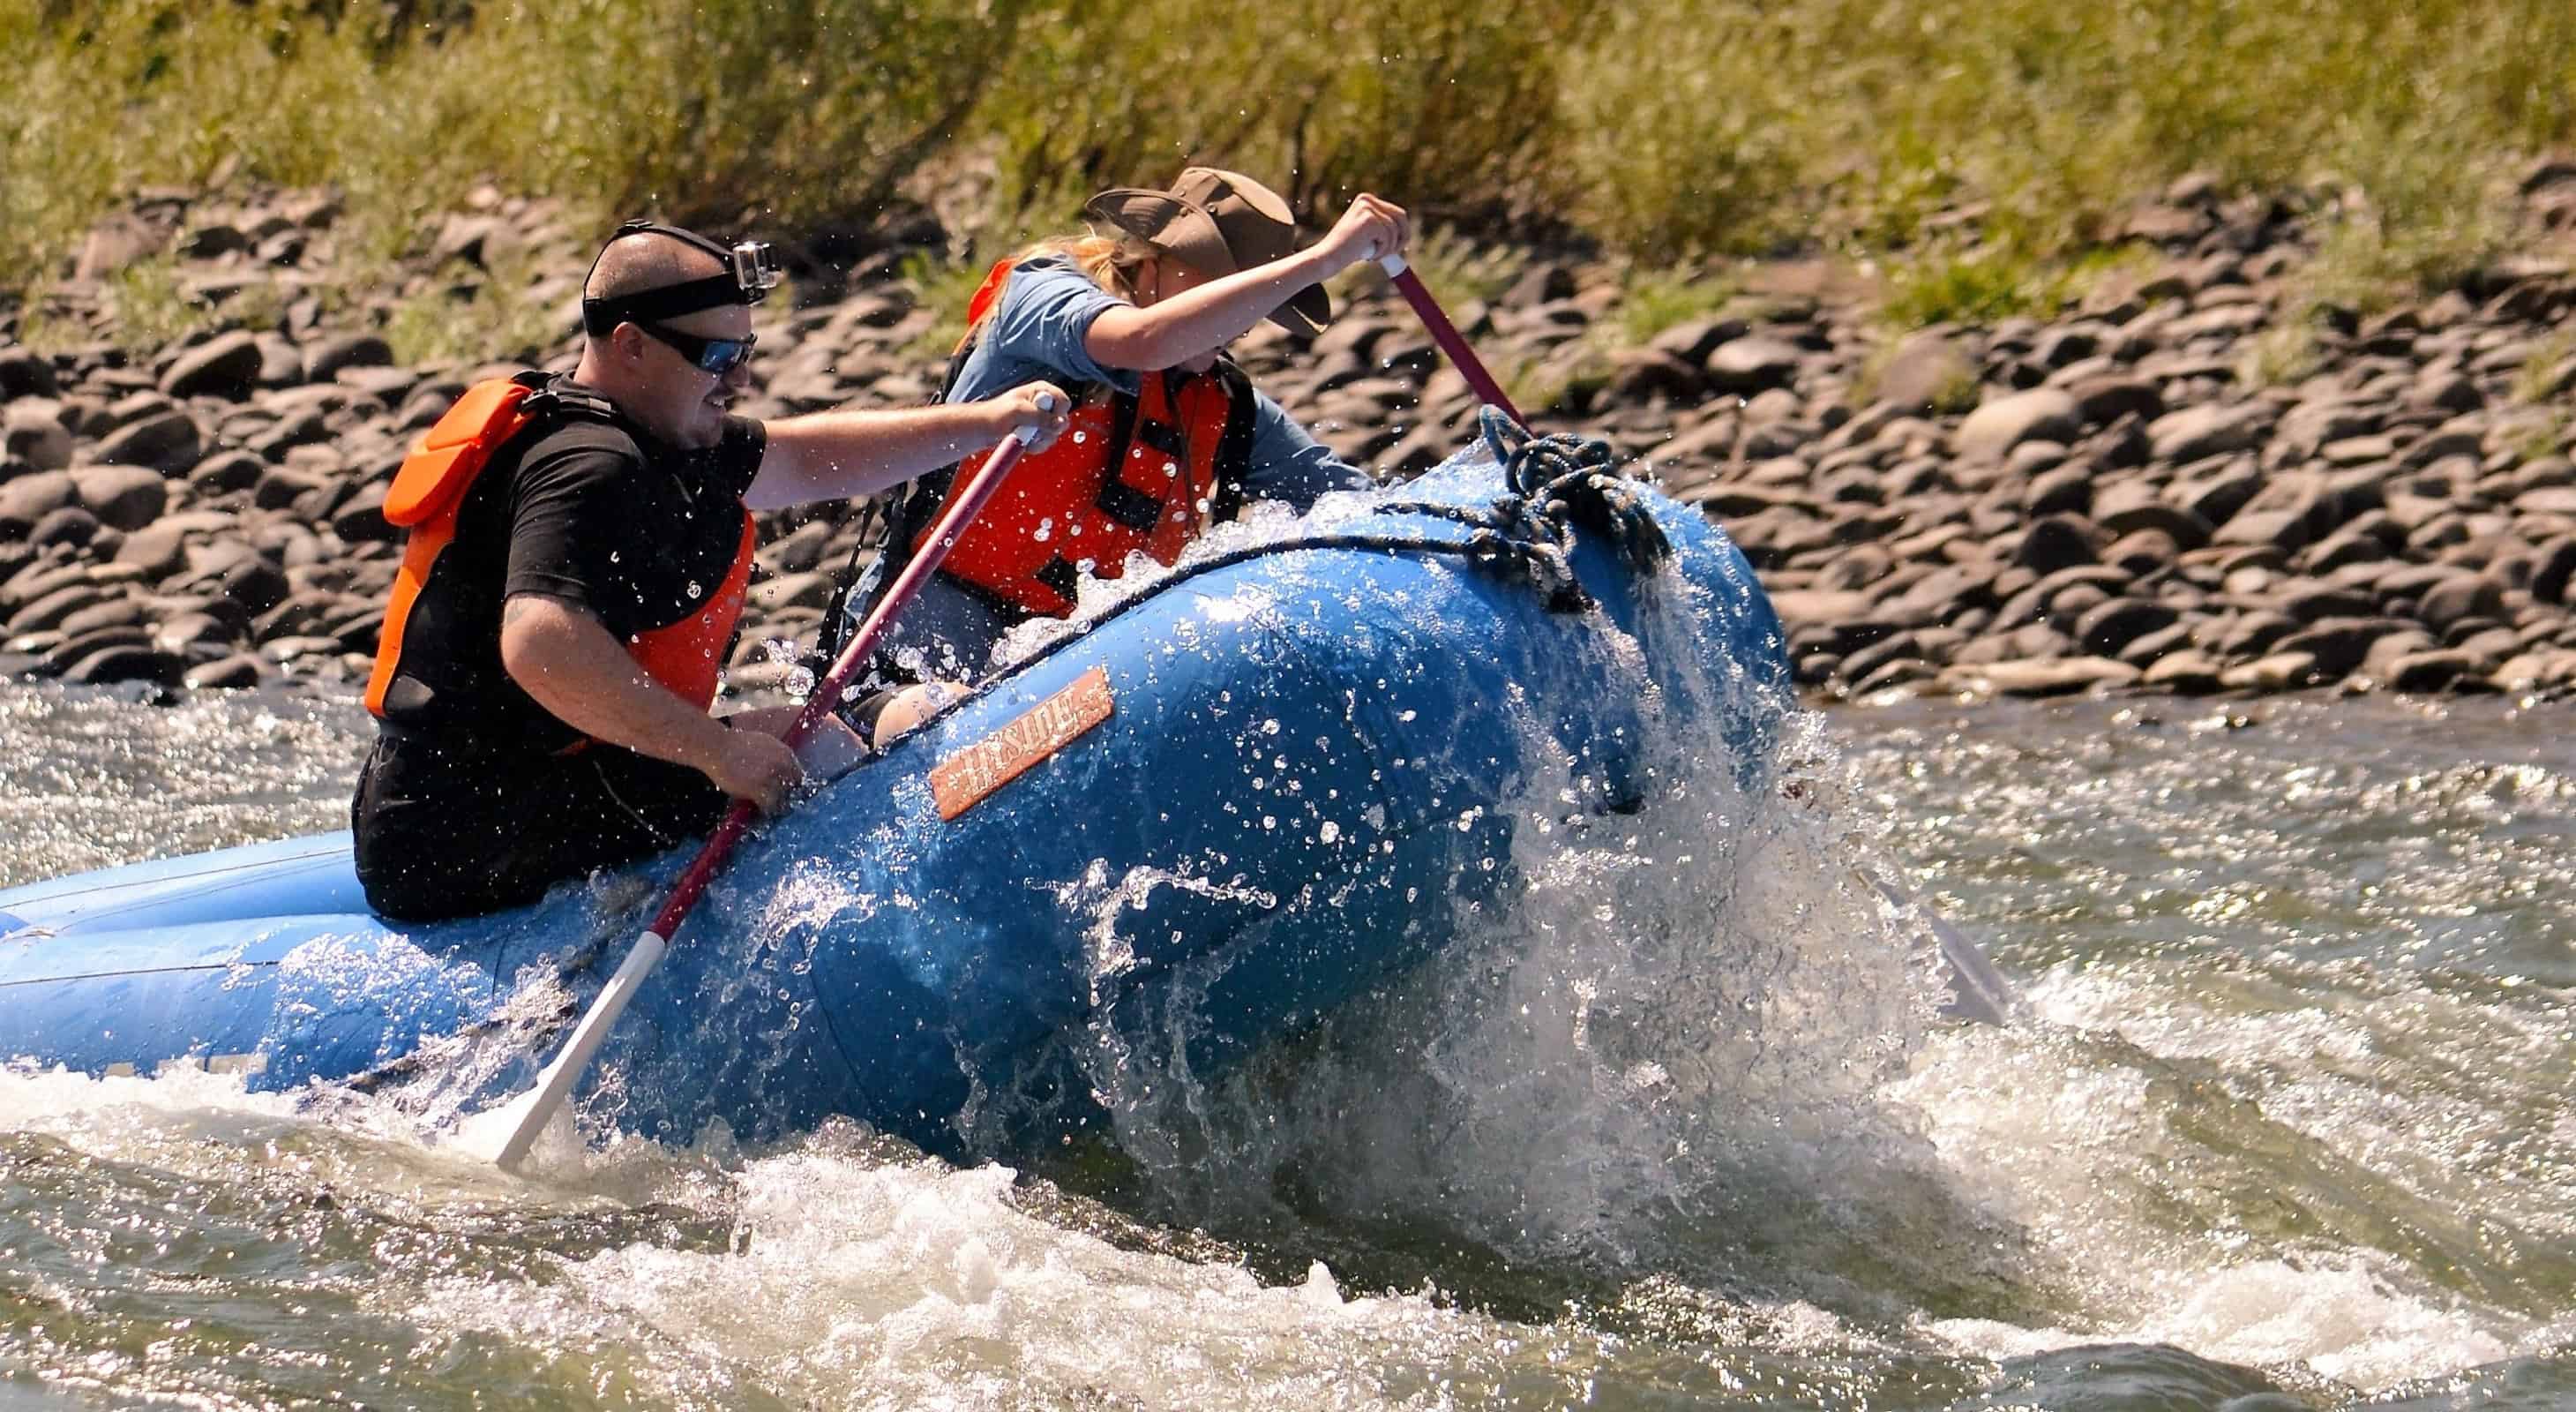 Two people whitewater rafting